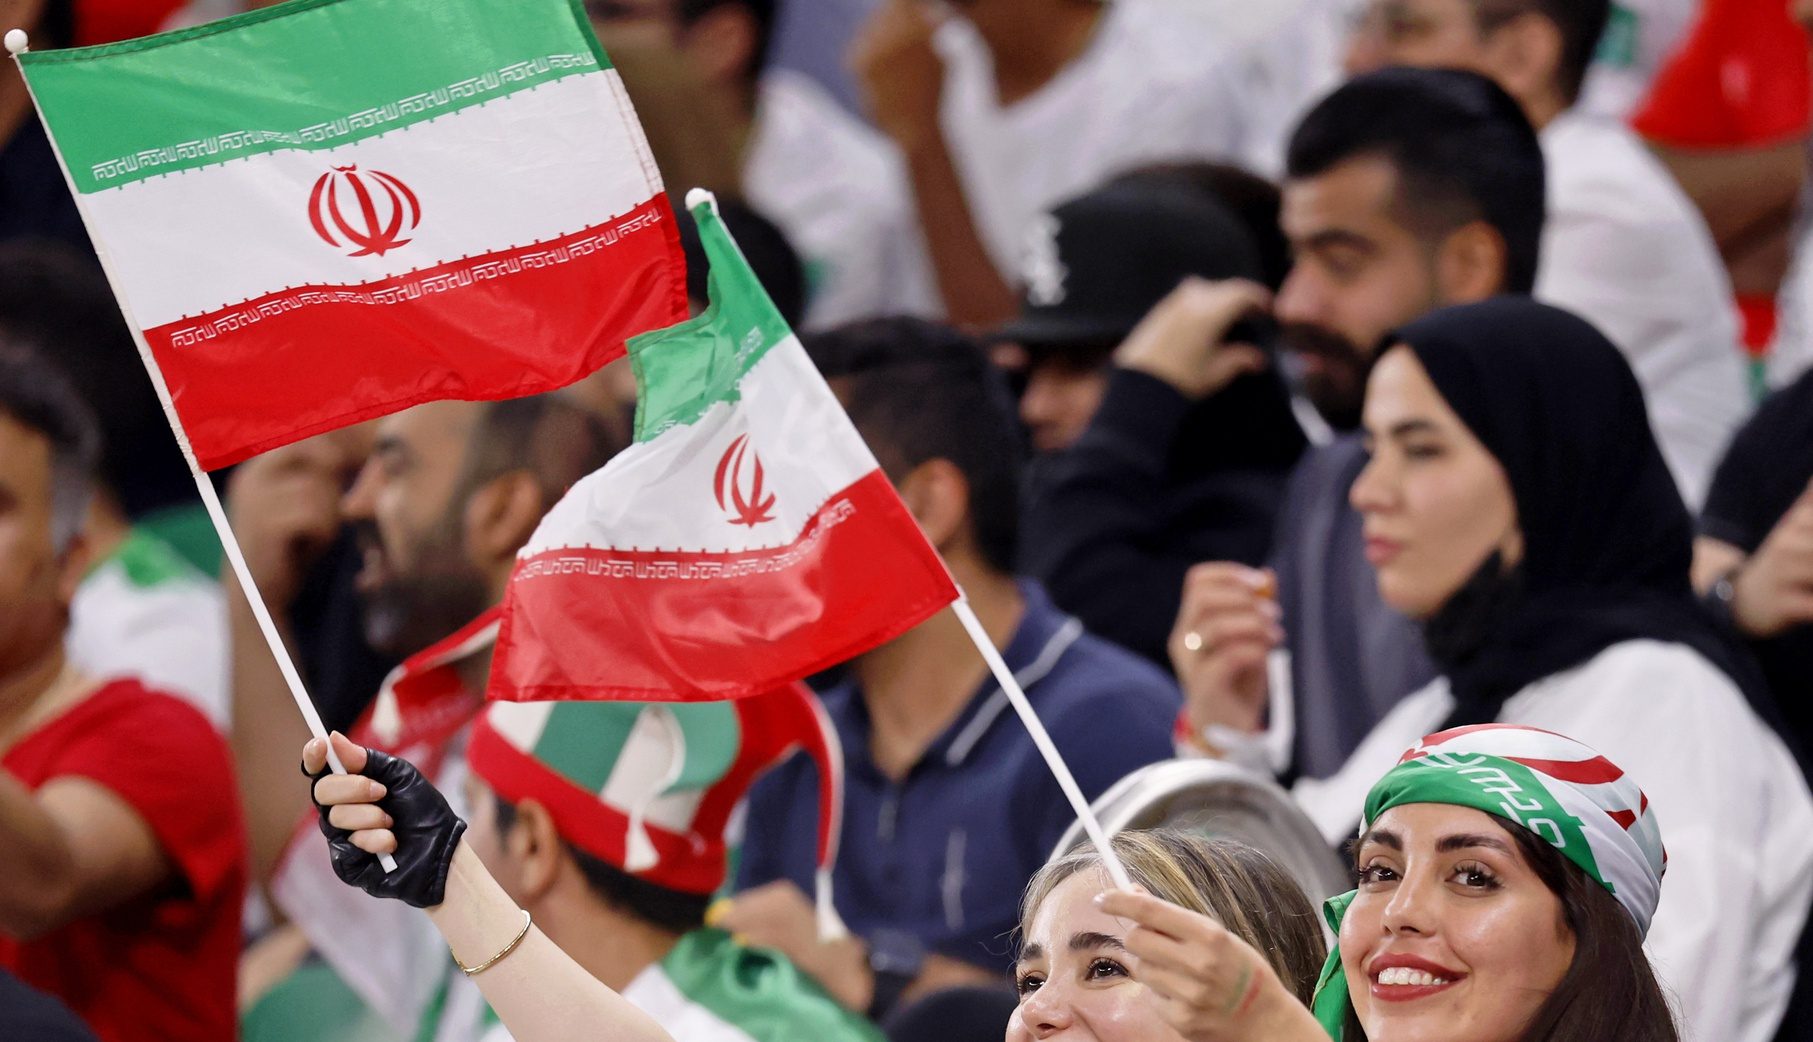 Nov 29, 2022; Doha, Qatar; Iran fans during the first half of a group stage match during the 2022 World Cup at Al Thumama Stadium.